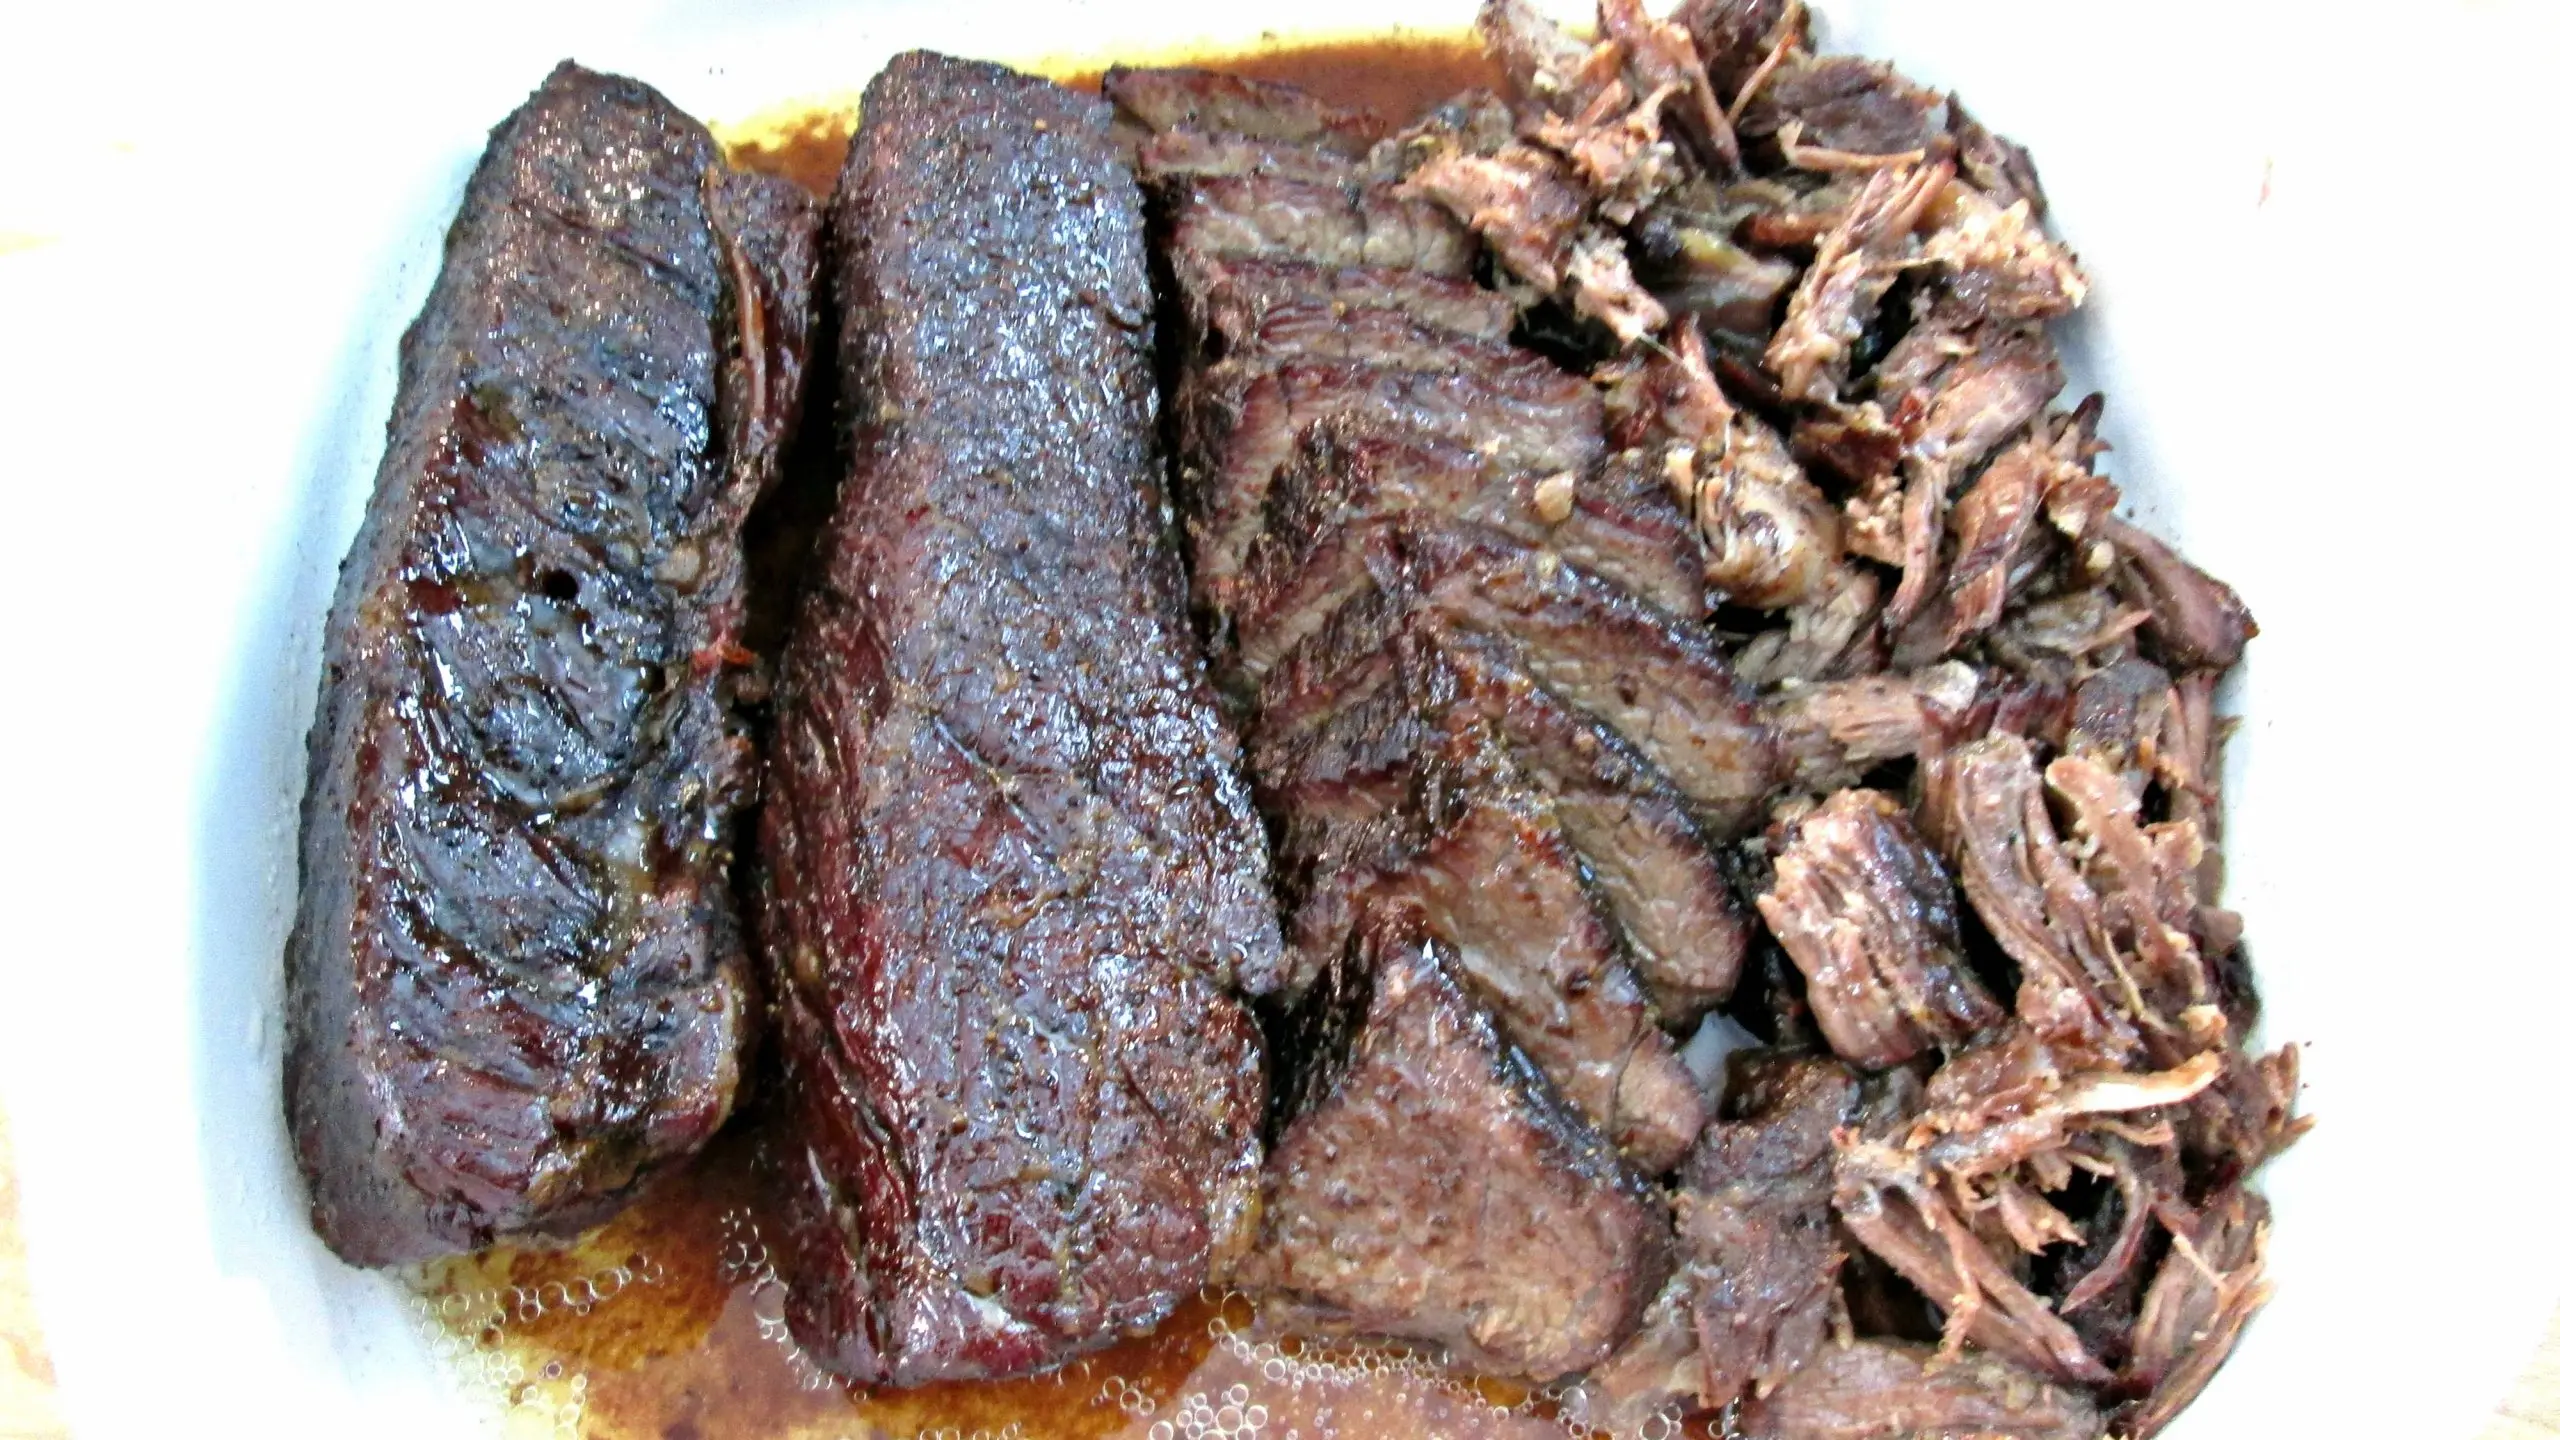 smoked boneless beef ribs - How long does it take to smoke boneless beef ribs